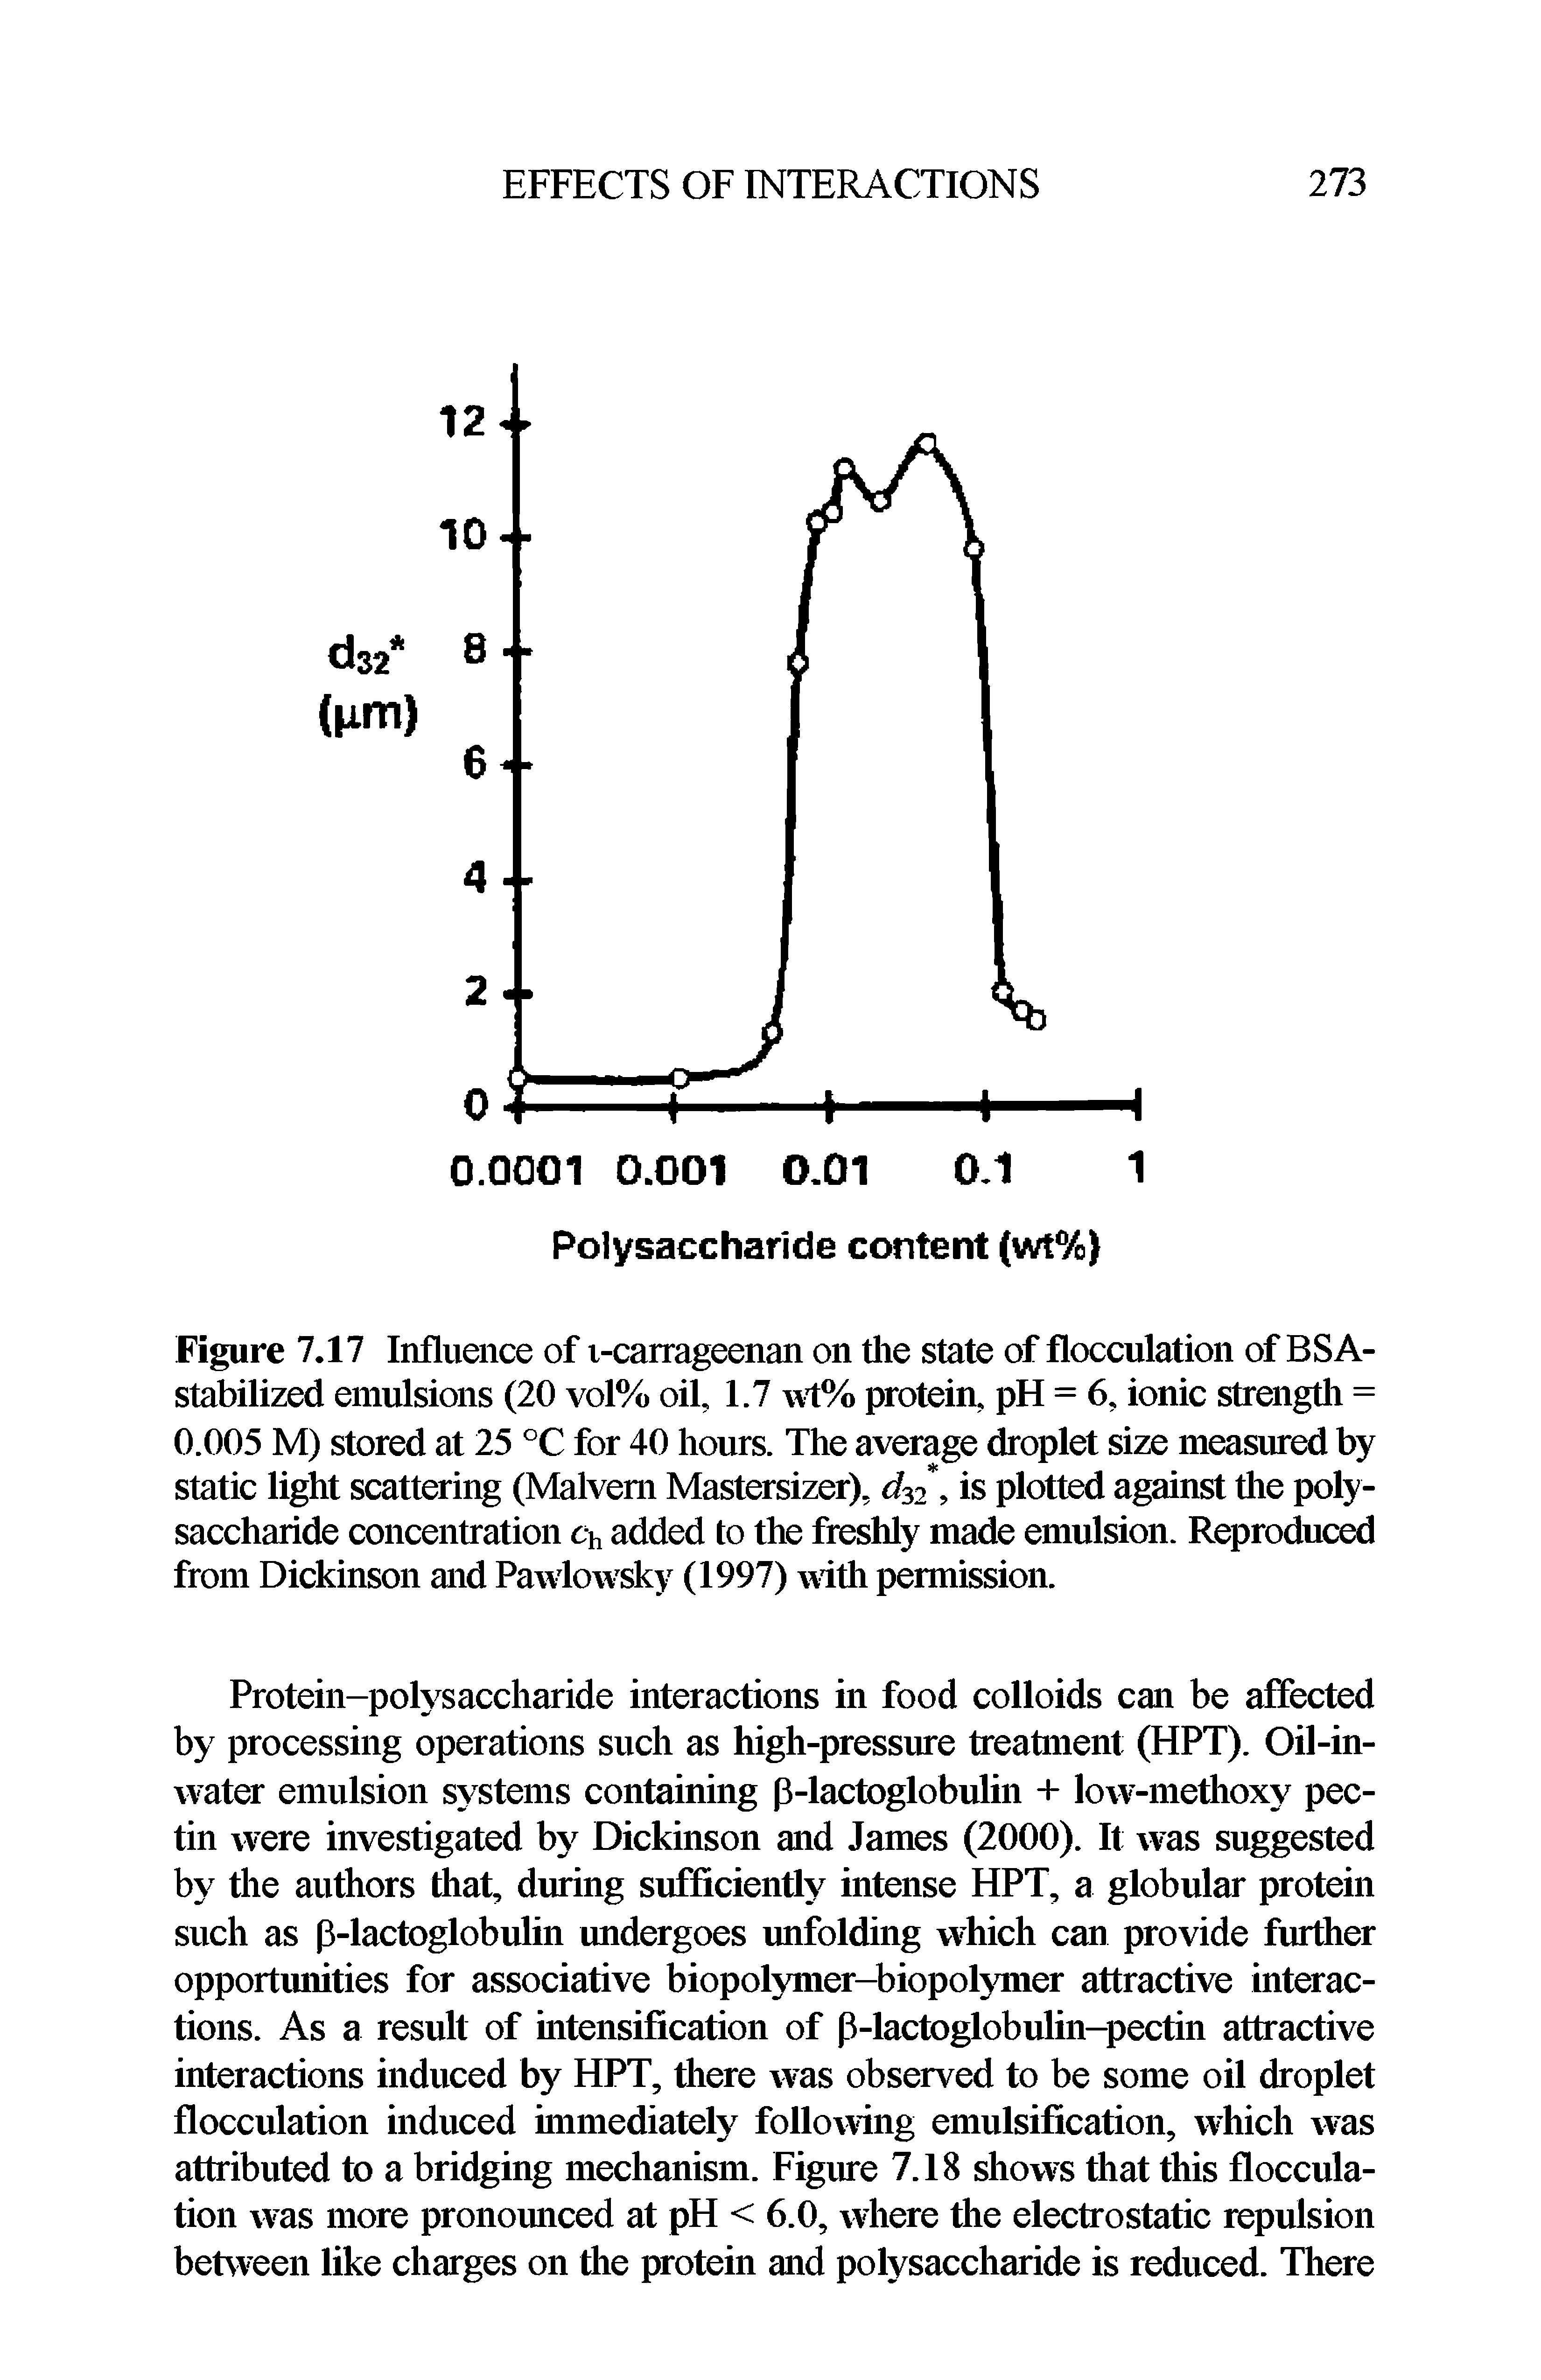 Figure 7.17 Influence of i-carrageenan on the state of flocculation of BSA-stabilized emulsions (20 vol% oil, 1.7 vt% protein. pH = 6, ionic strength = 0.005 M) stored at 25 °C for 40 hours. The average droplet size measured by static light scattering (Malvern Mastersizer), d32, is plotted against the polysaccharide concentration ch added to the freshly made emulsion. Reproduced from Dickinson and Pawlowsky (1997) with permission.